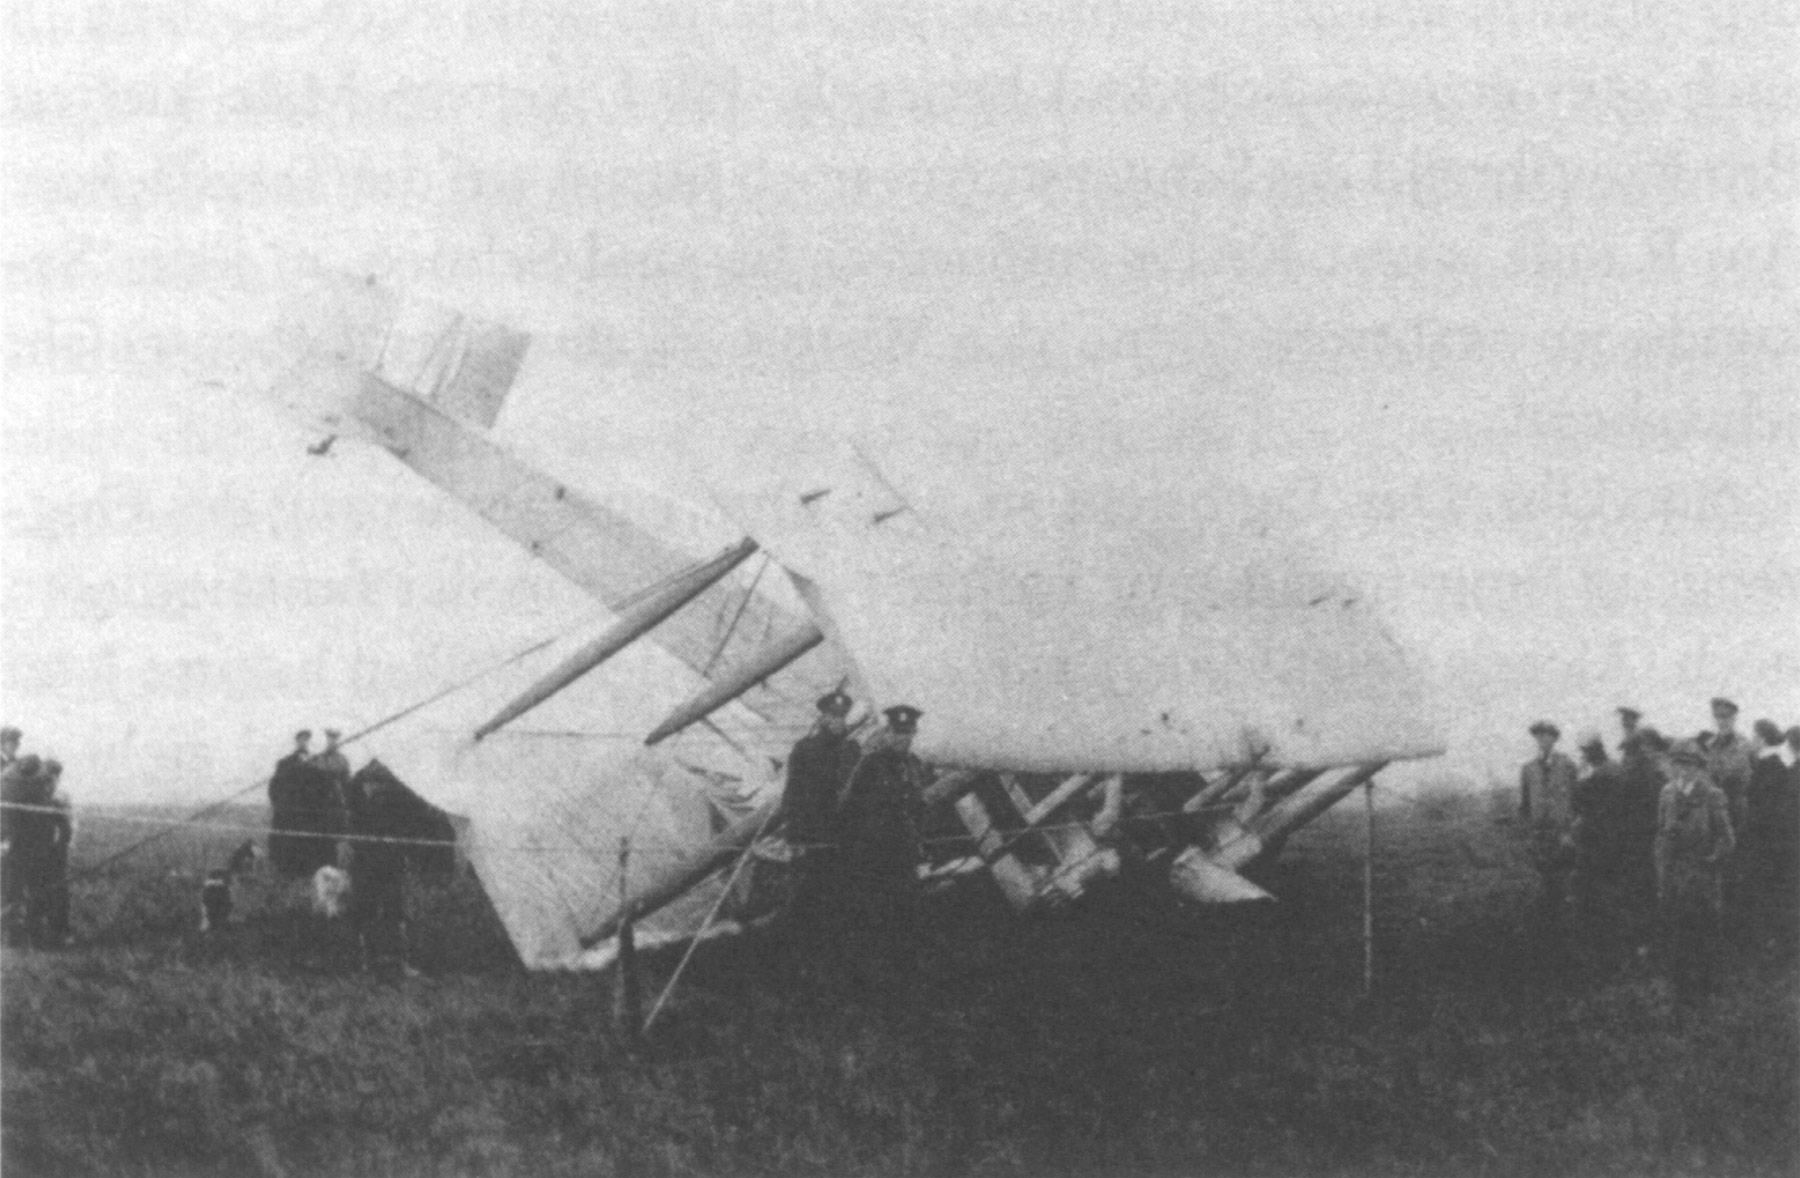 Picture shows a plane crash landed in a field following the transatlantic flight of Alcock and Brown